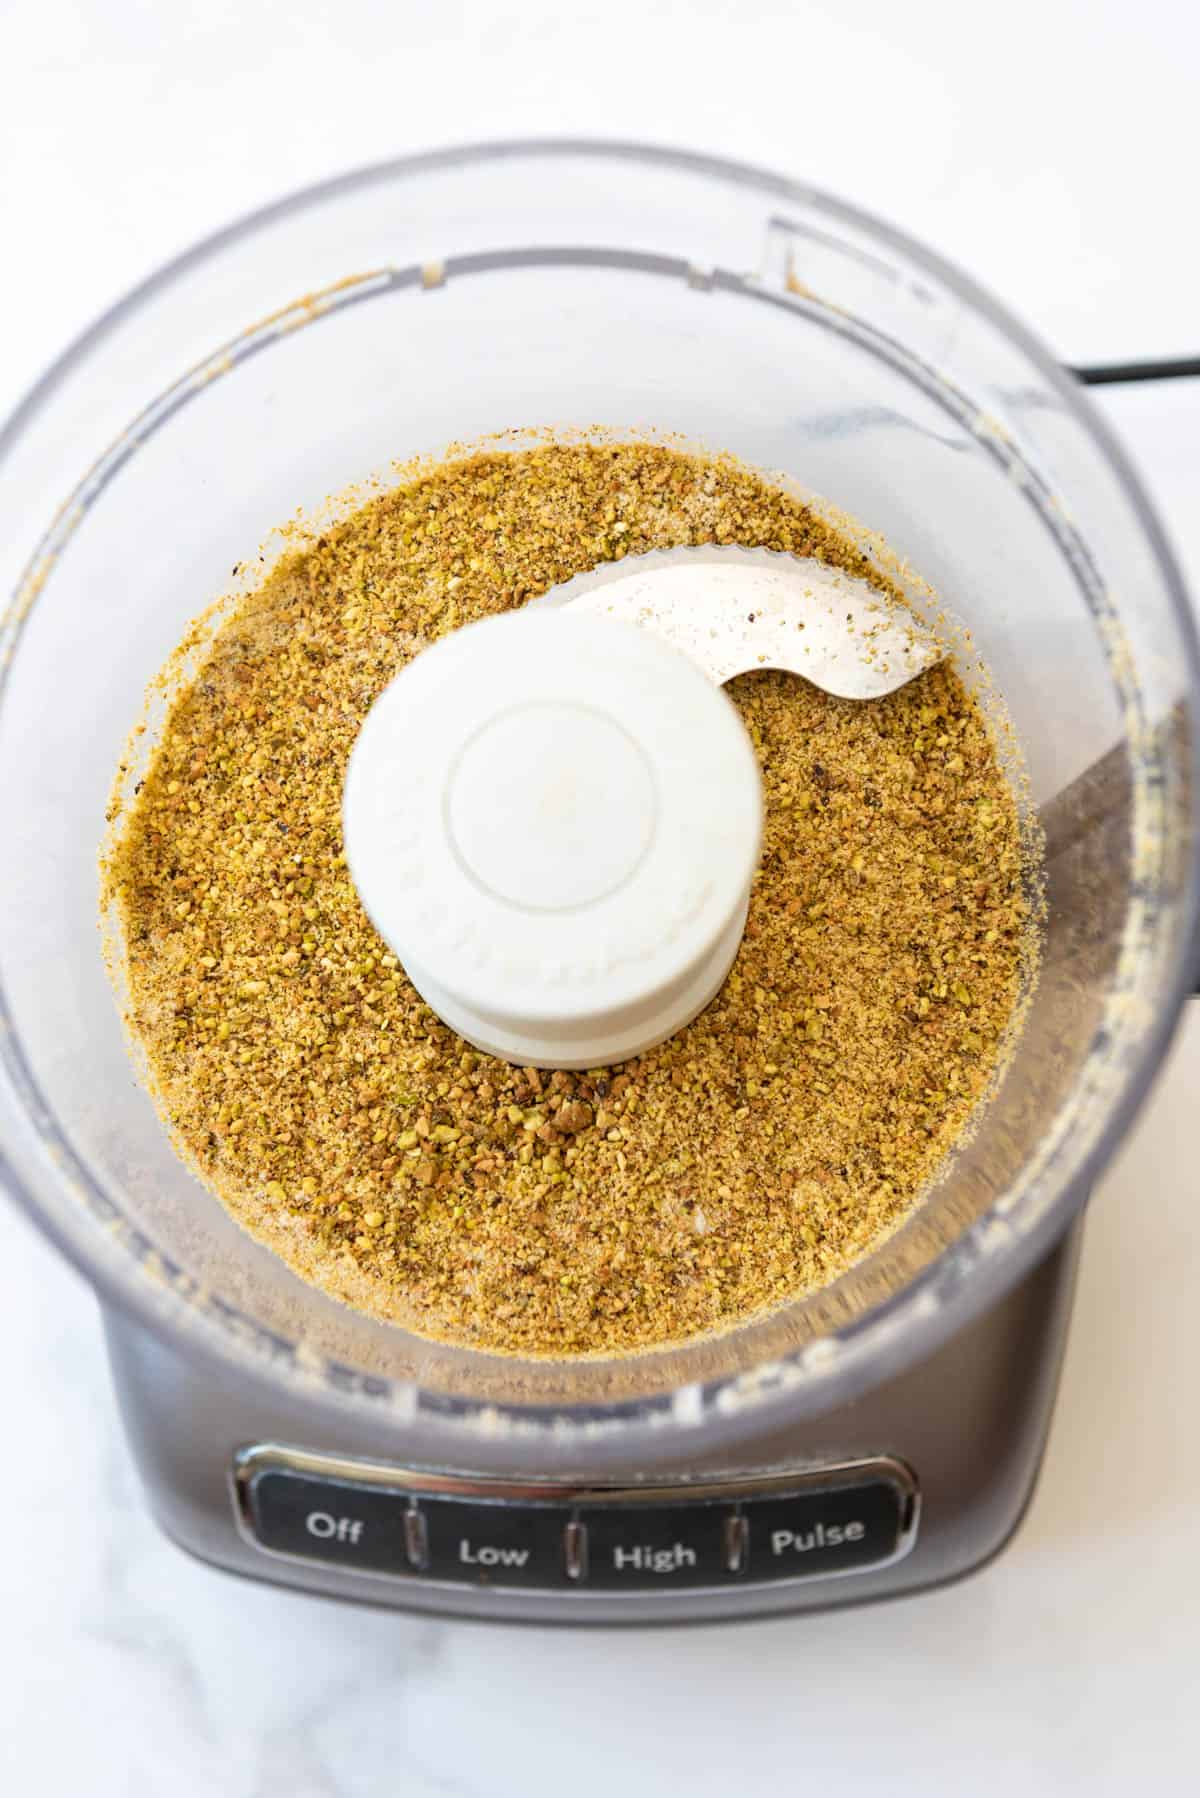 Pistachios and sugar that have been pulsed in a food processor until finely ground.